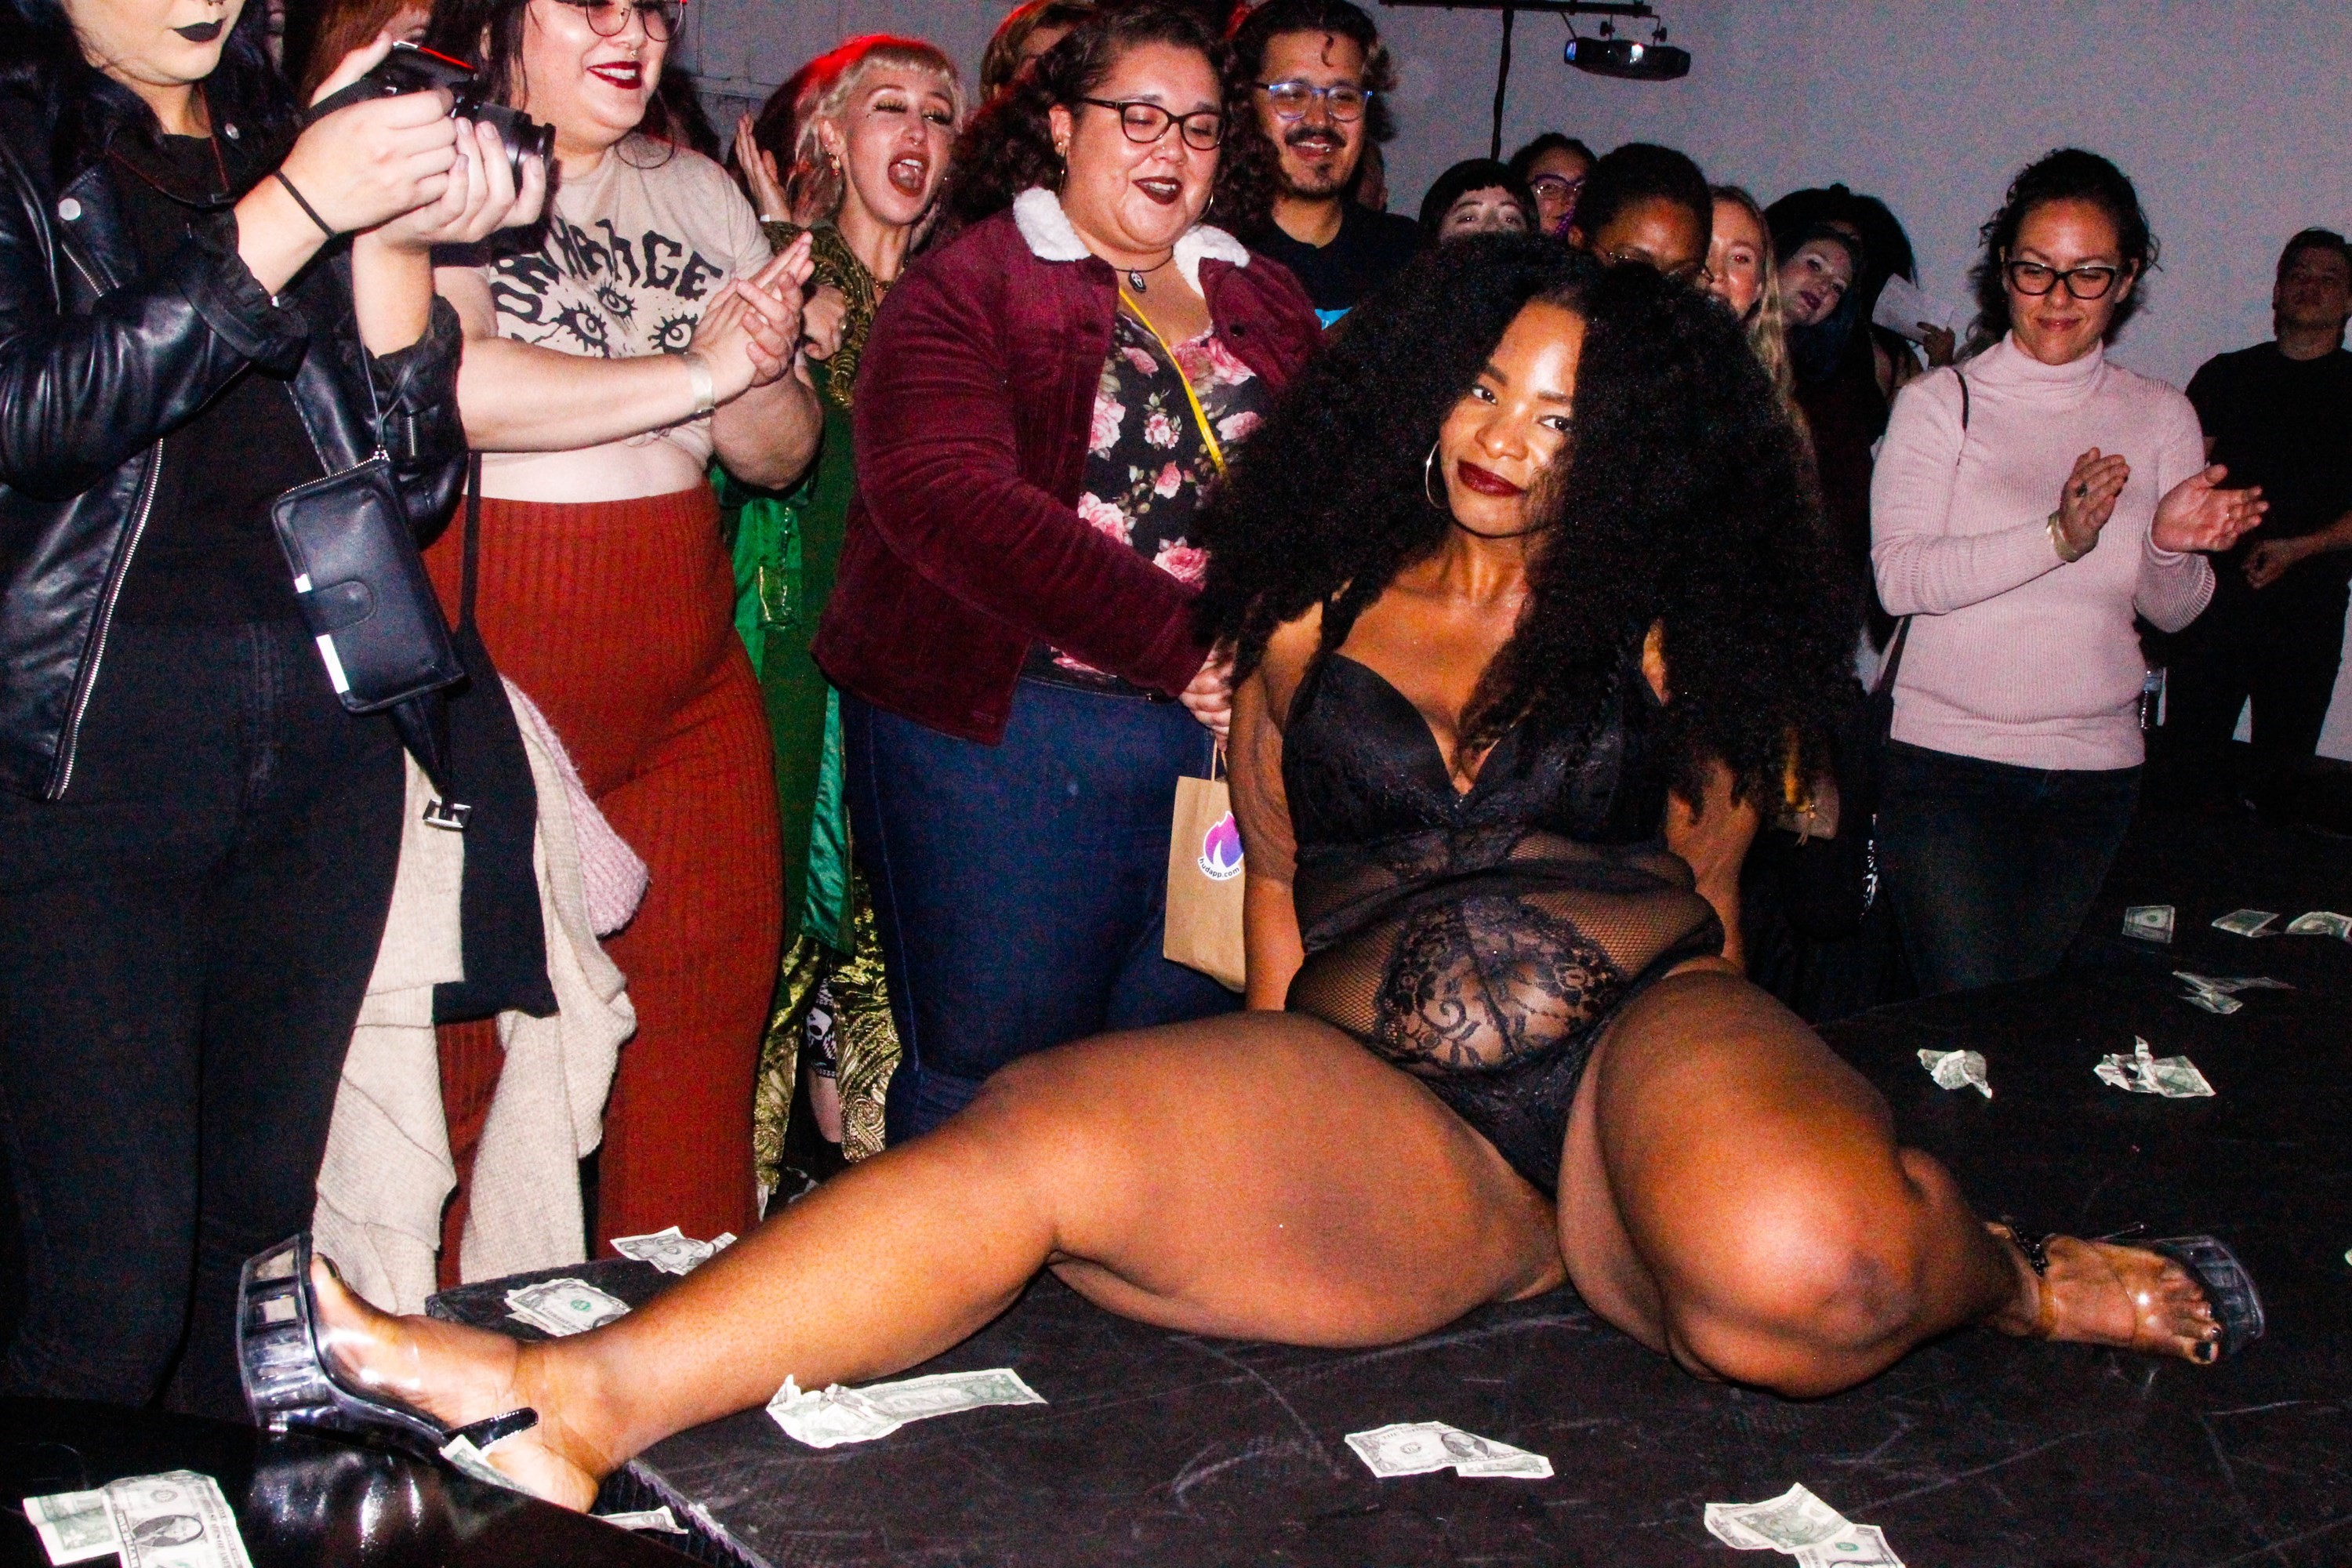 The body positive LA strip show founded by plus size women Dazed pic